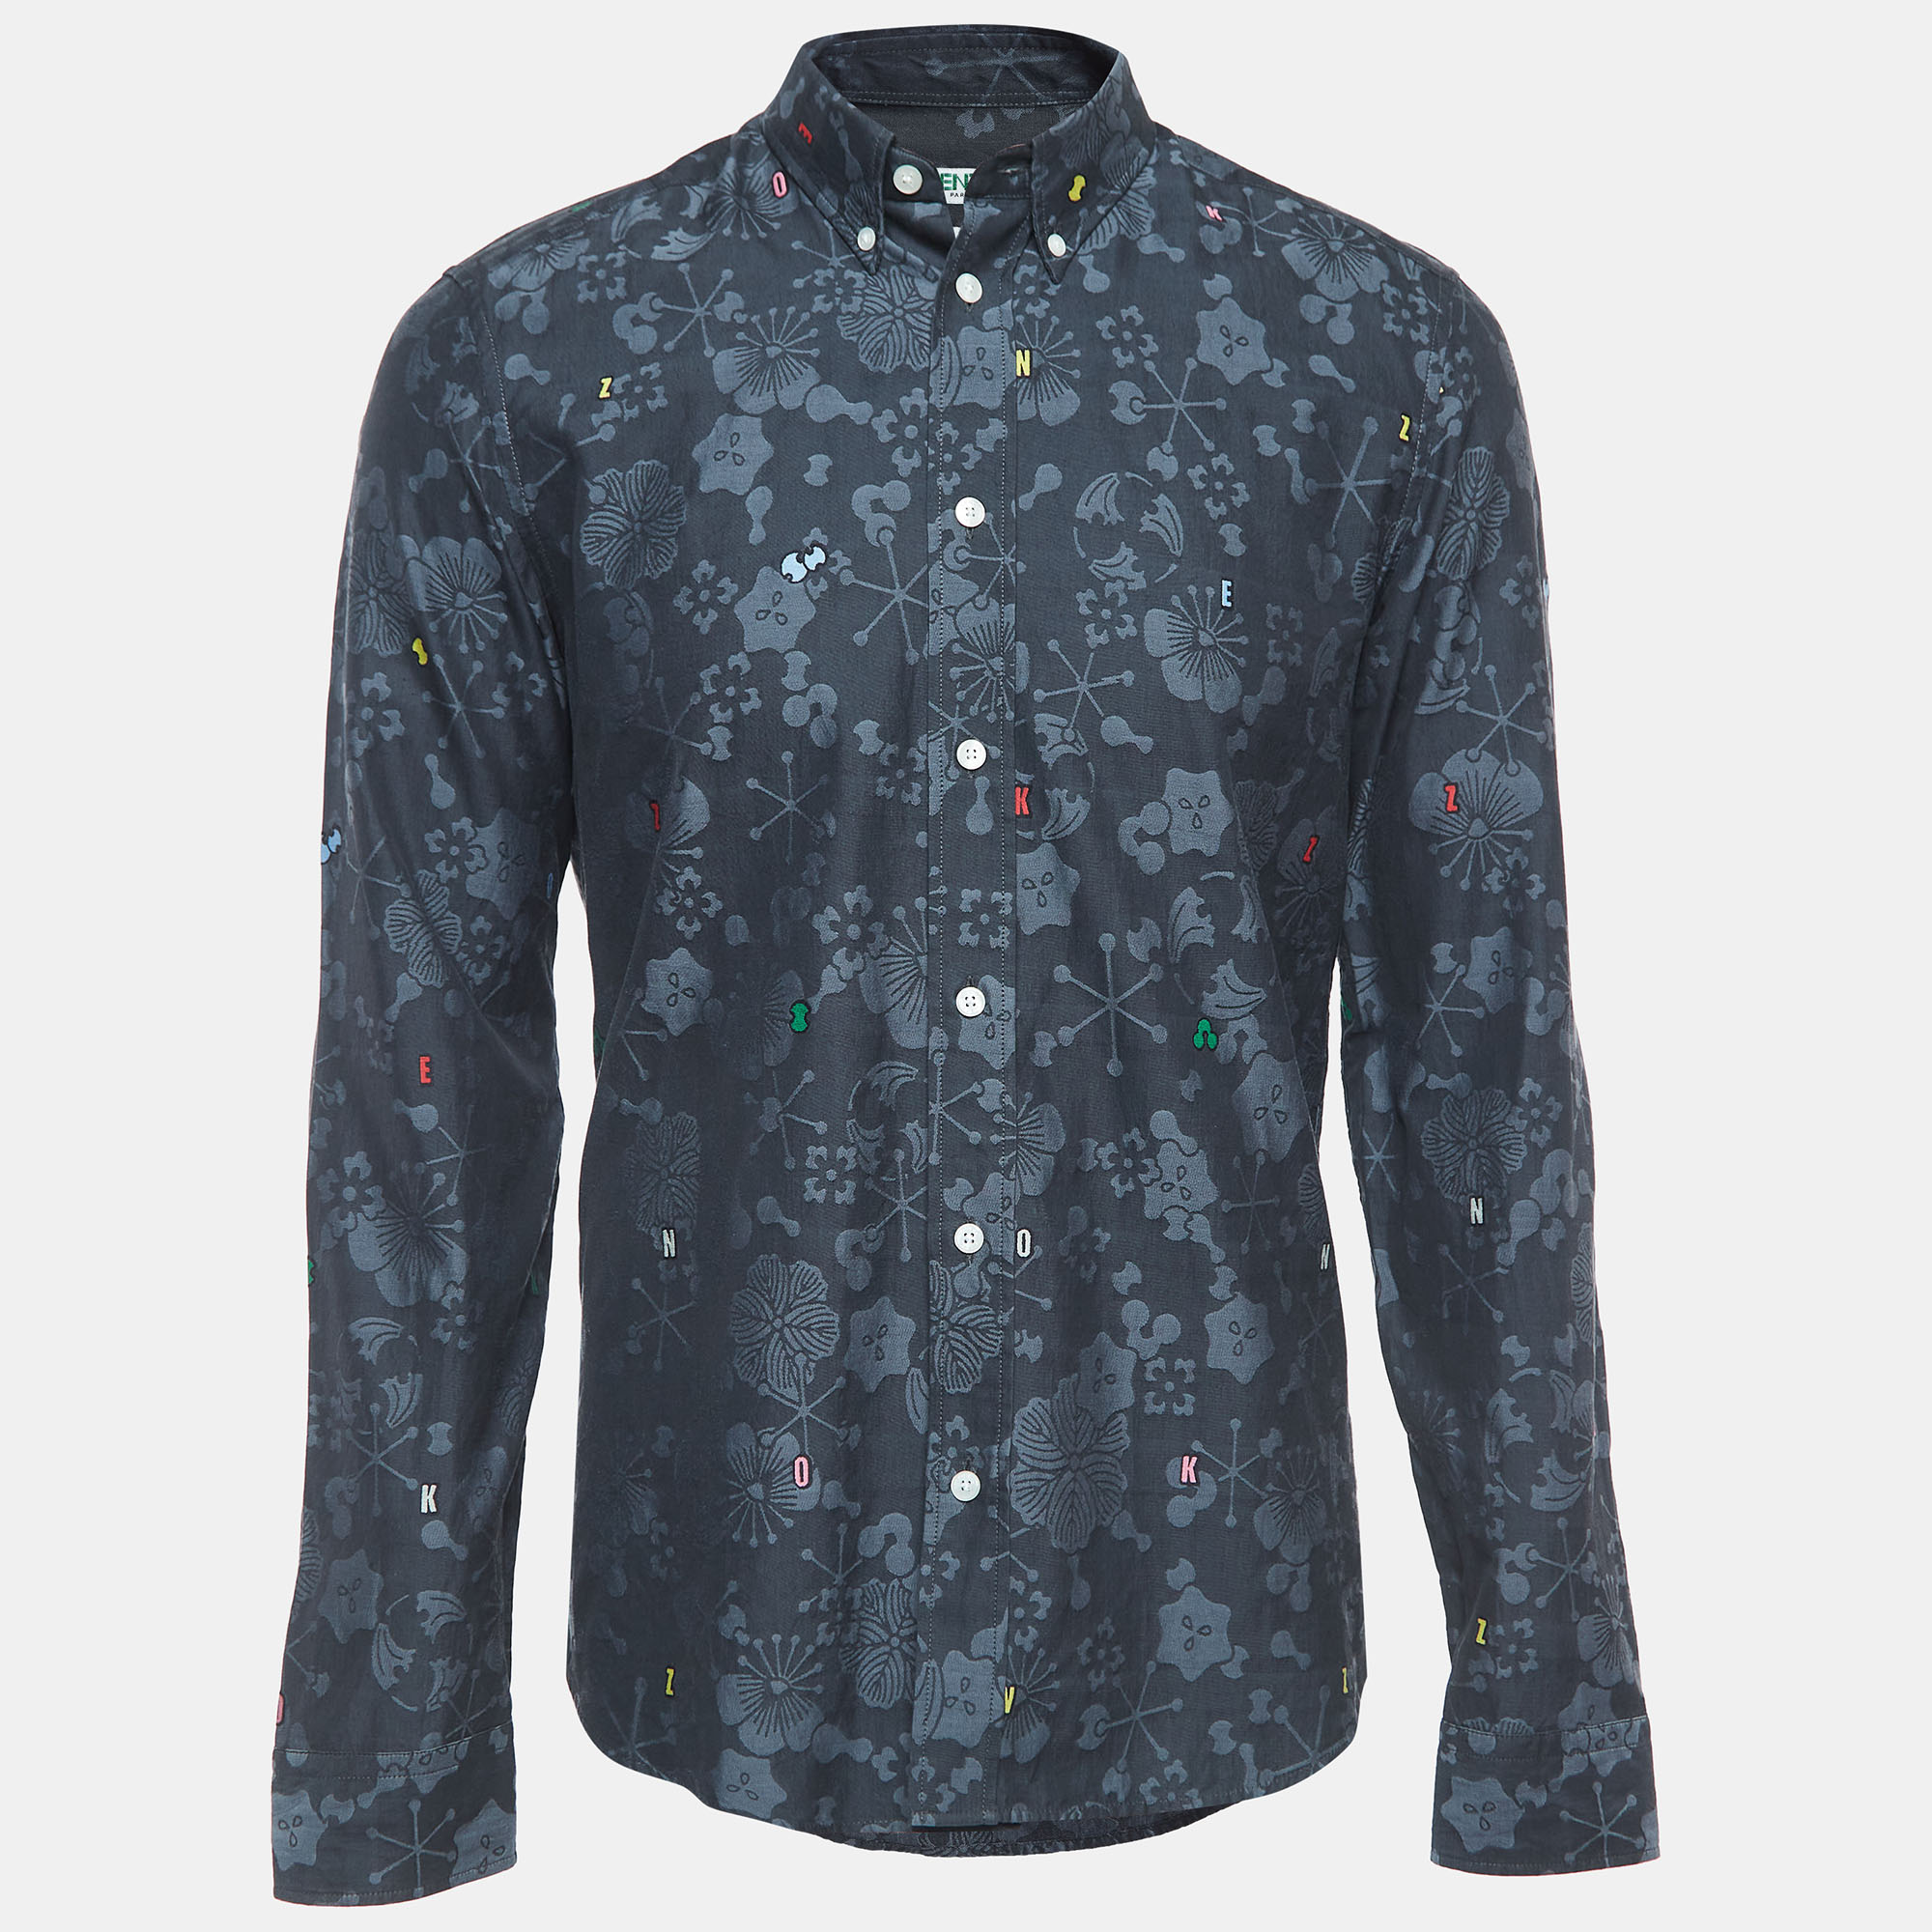 Kenzo Navy Blue Floral Patterned Button Down Full Sleeve Shirt M